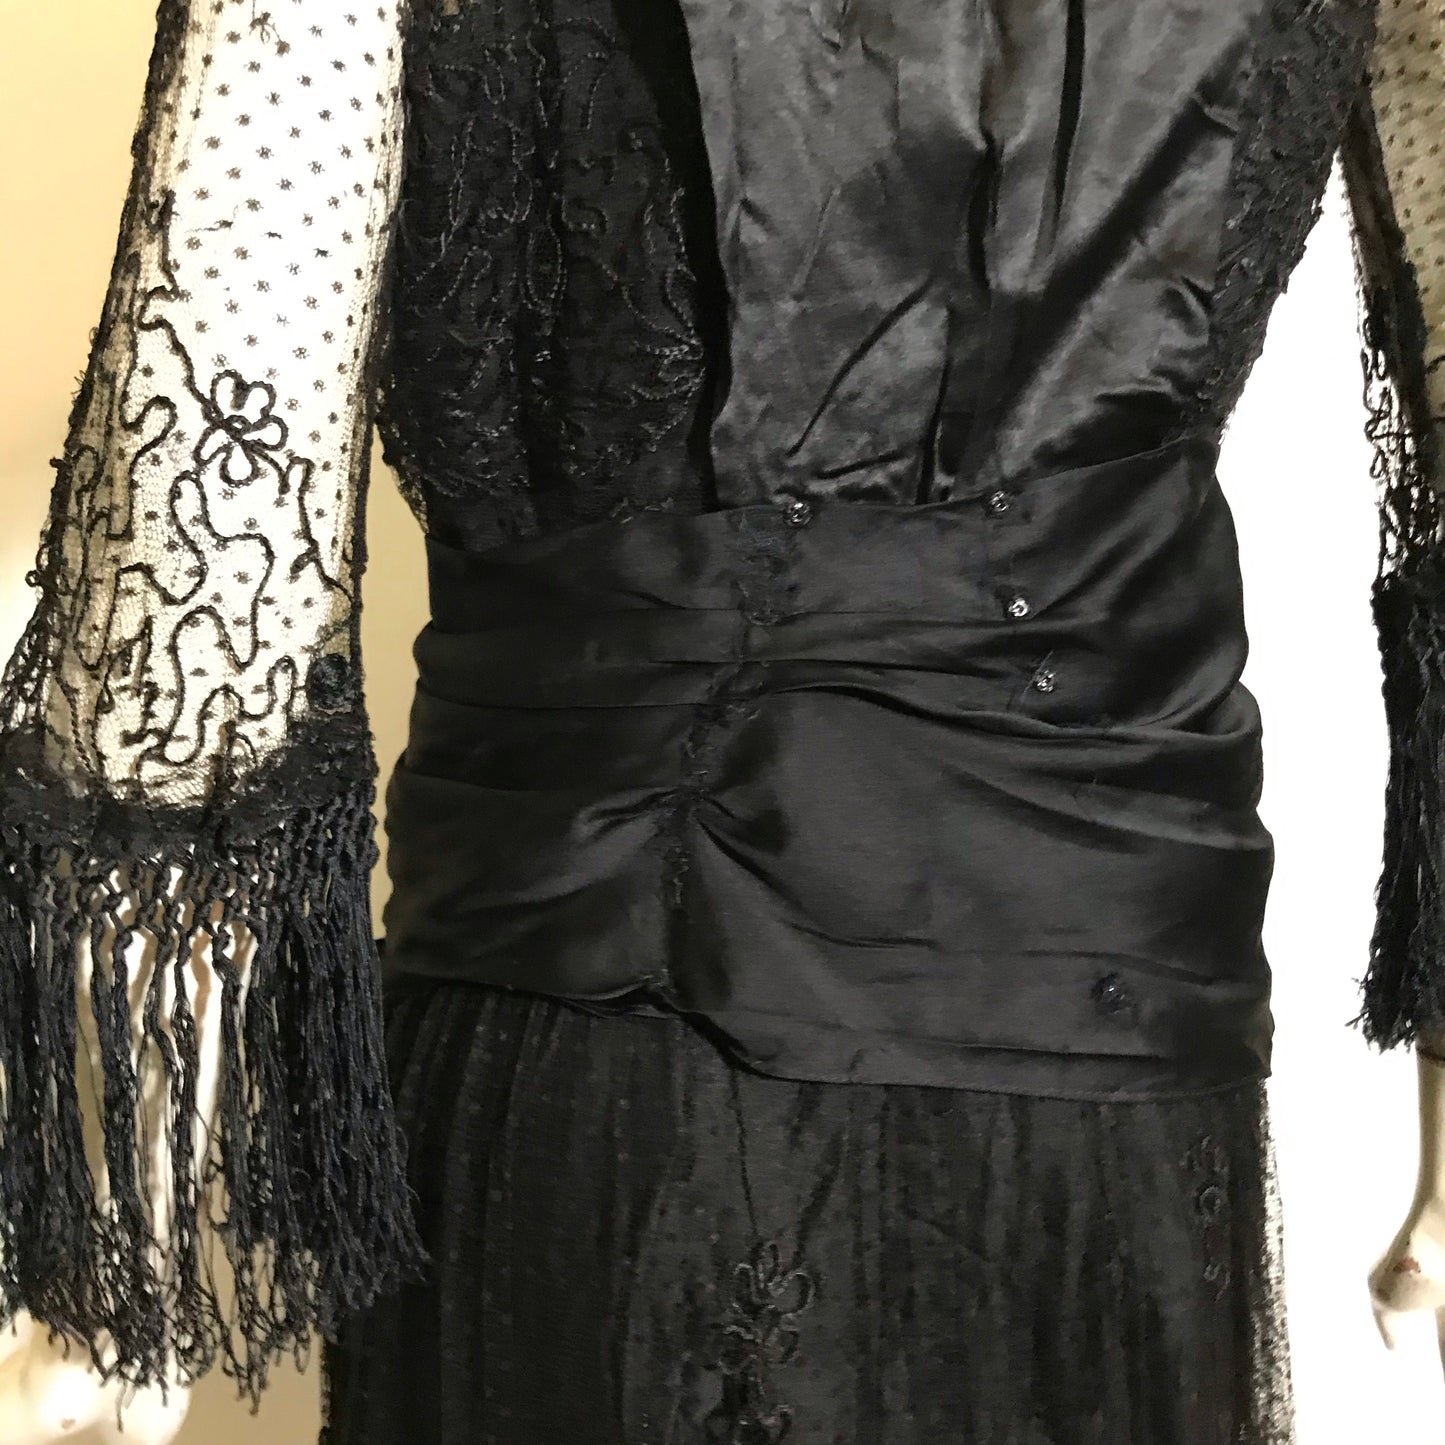 Elaborate Ink Black Silk Formal Dress with Beading Lace and Long Fringe circa 1910s